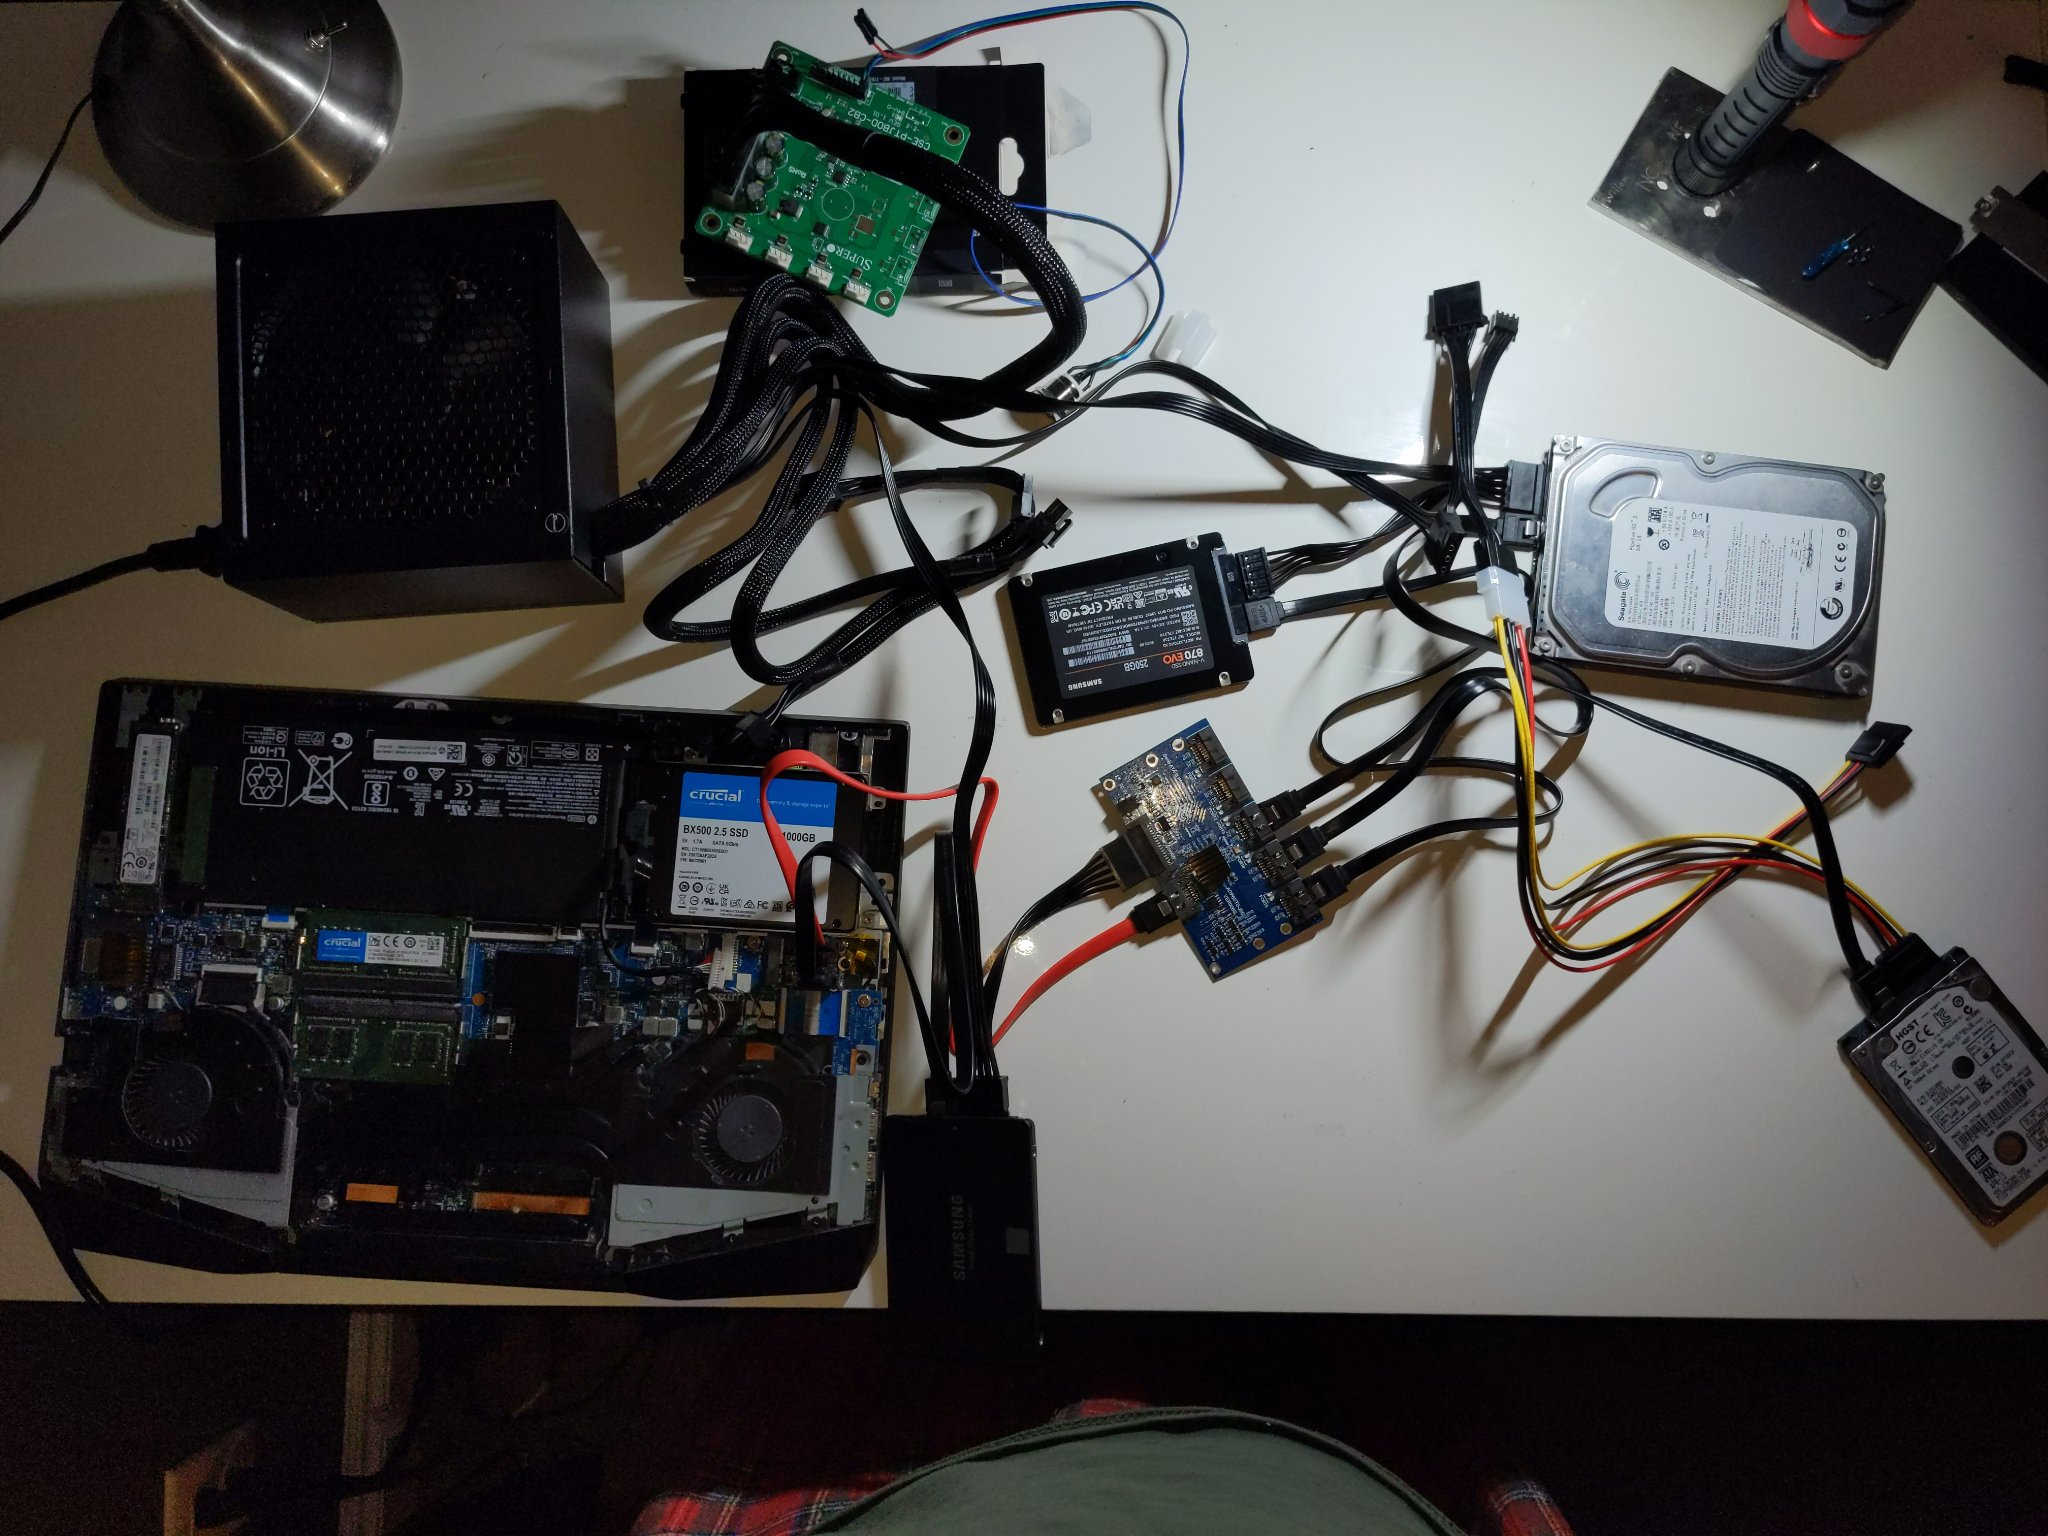 Five SATA drives plugged into a laptop, one via an internal SATA bay, and the other four via an M.2 SATA controller in place of the WiFi card and a SATA splitter board. The latter four hard drives are powered off of an ATX PC PSU controlled by a Supermicro JBOD controller board.